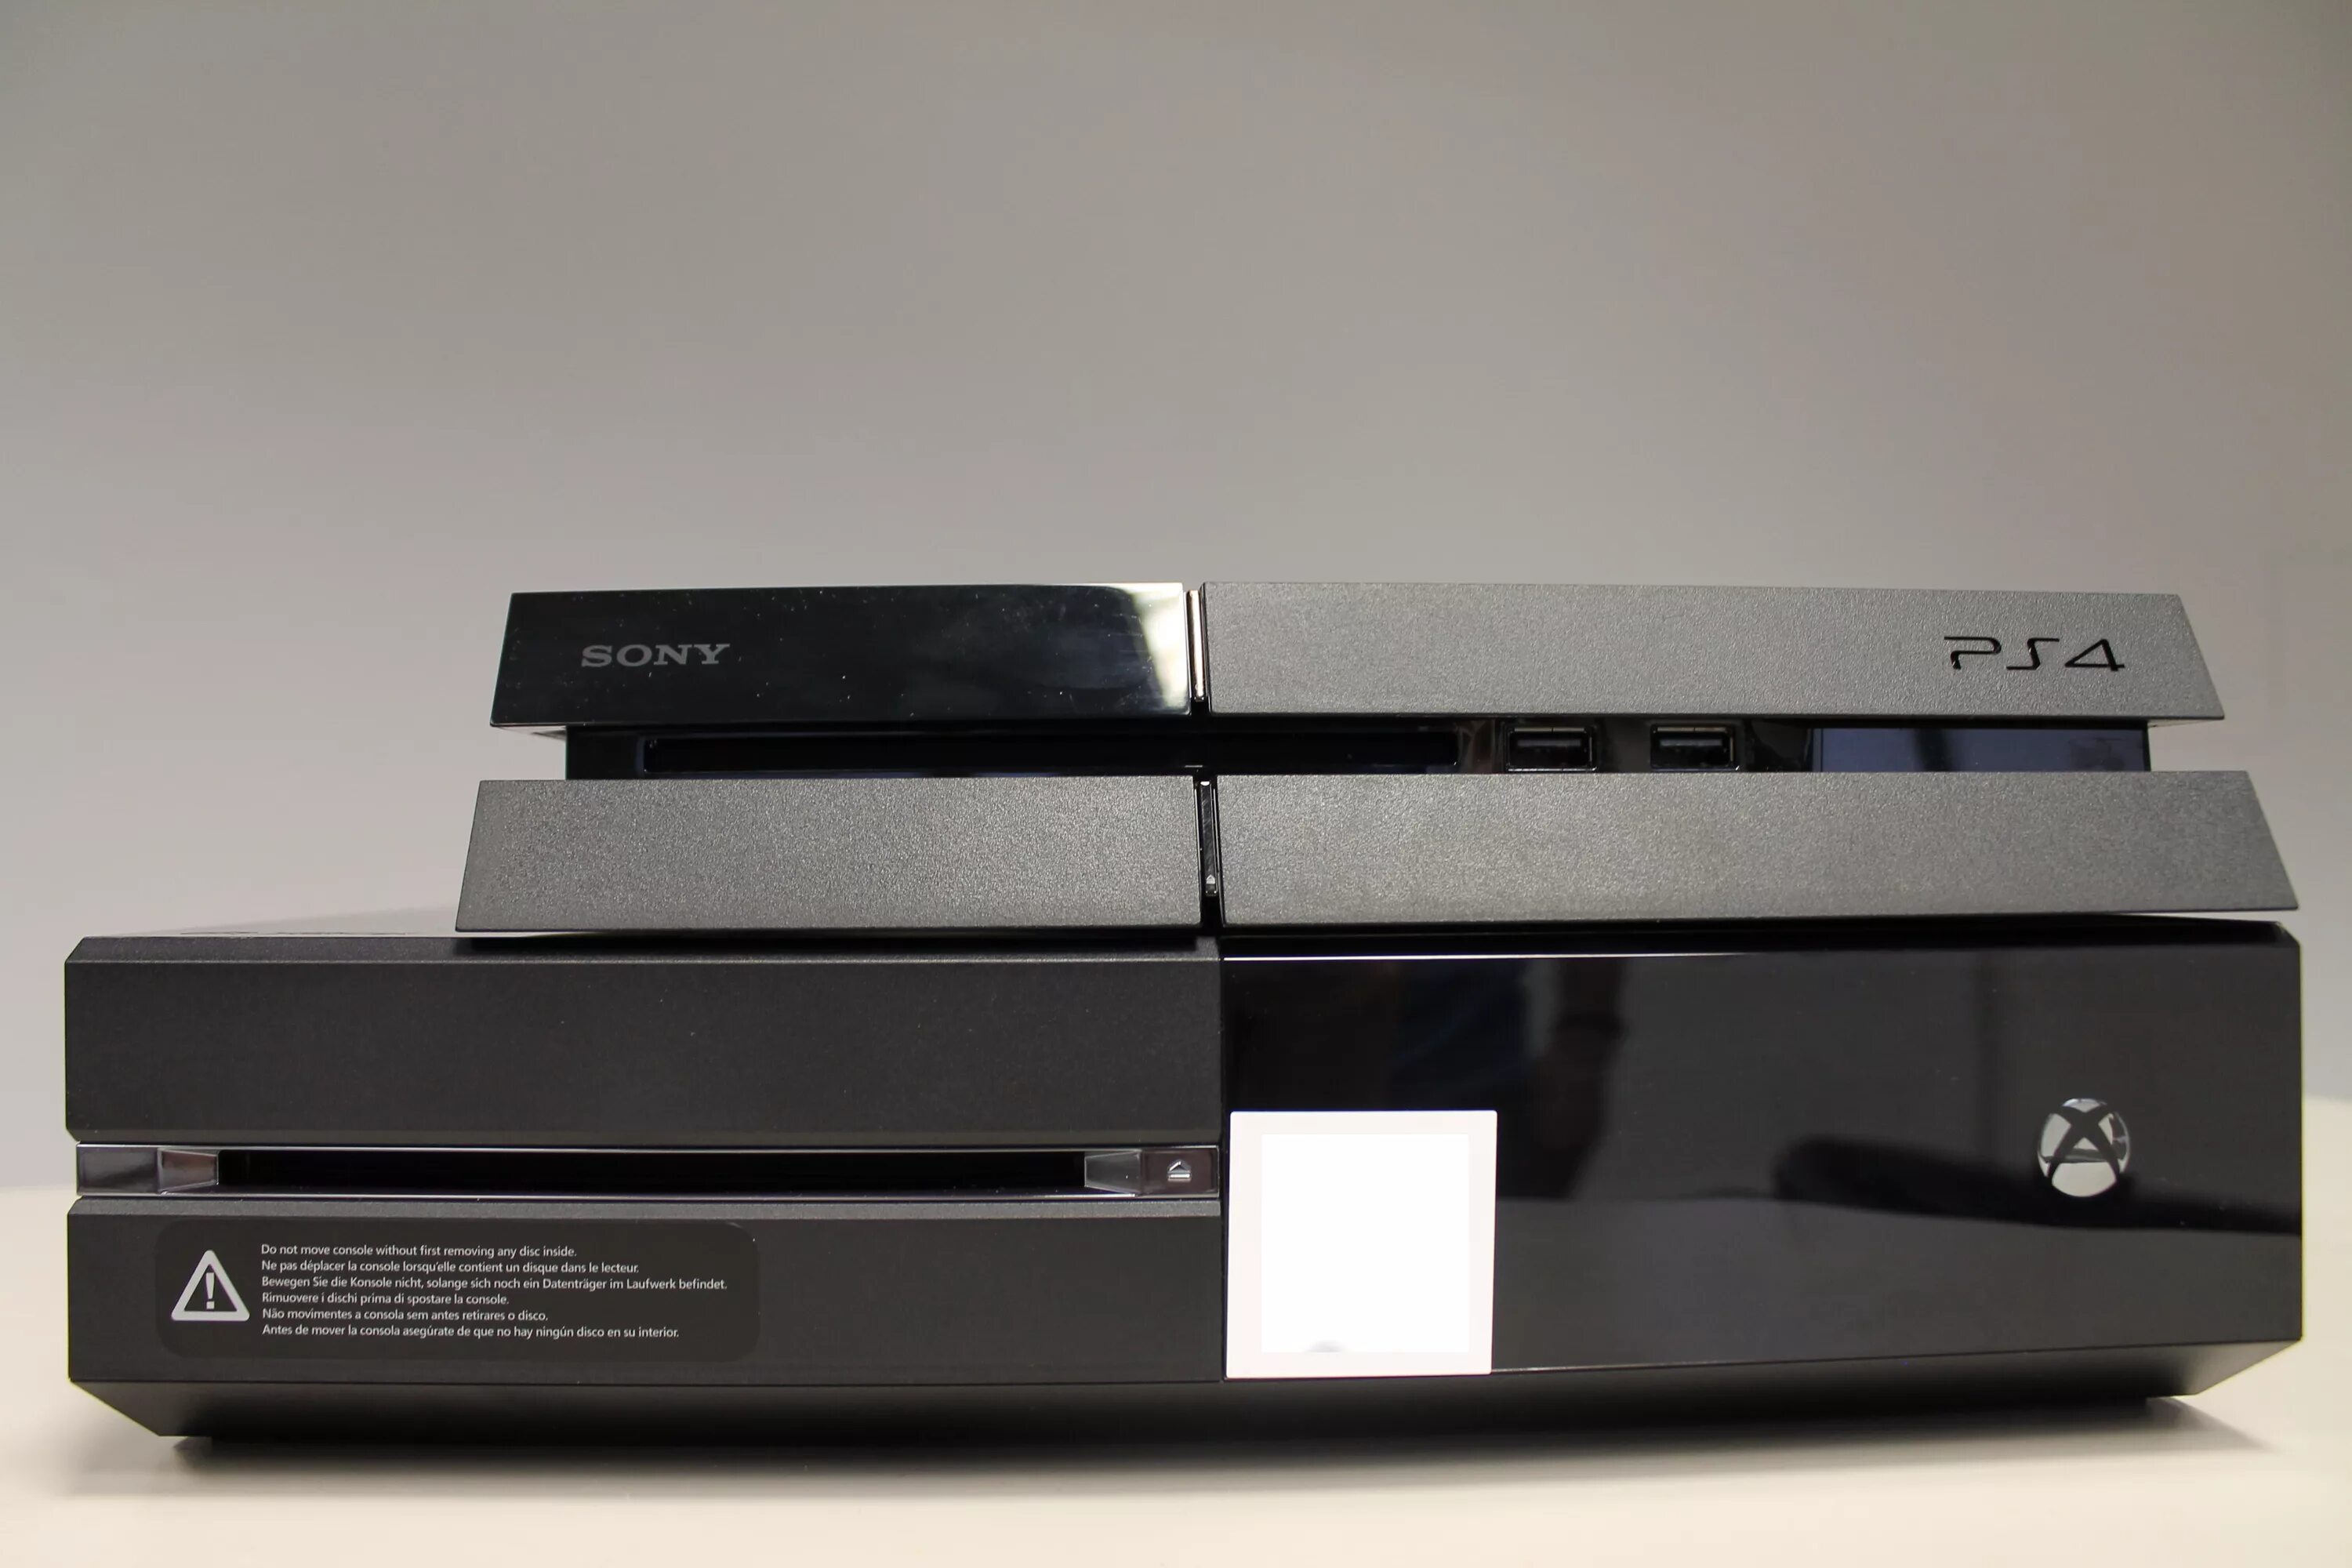 Ps4 Xbox one. Габариты пс4 фат. ПСП 4 фат. Xbox one fat. Что означает ps4